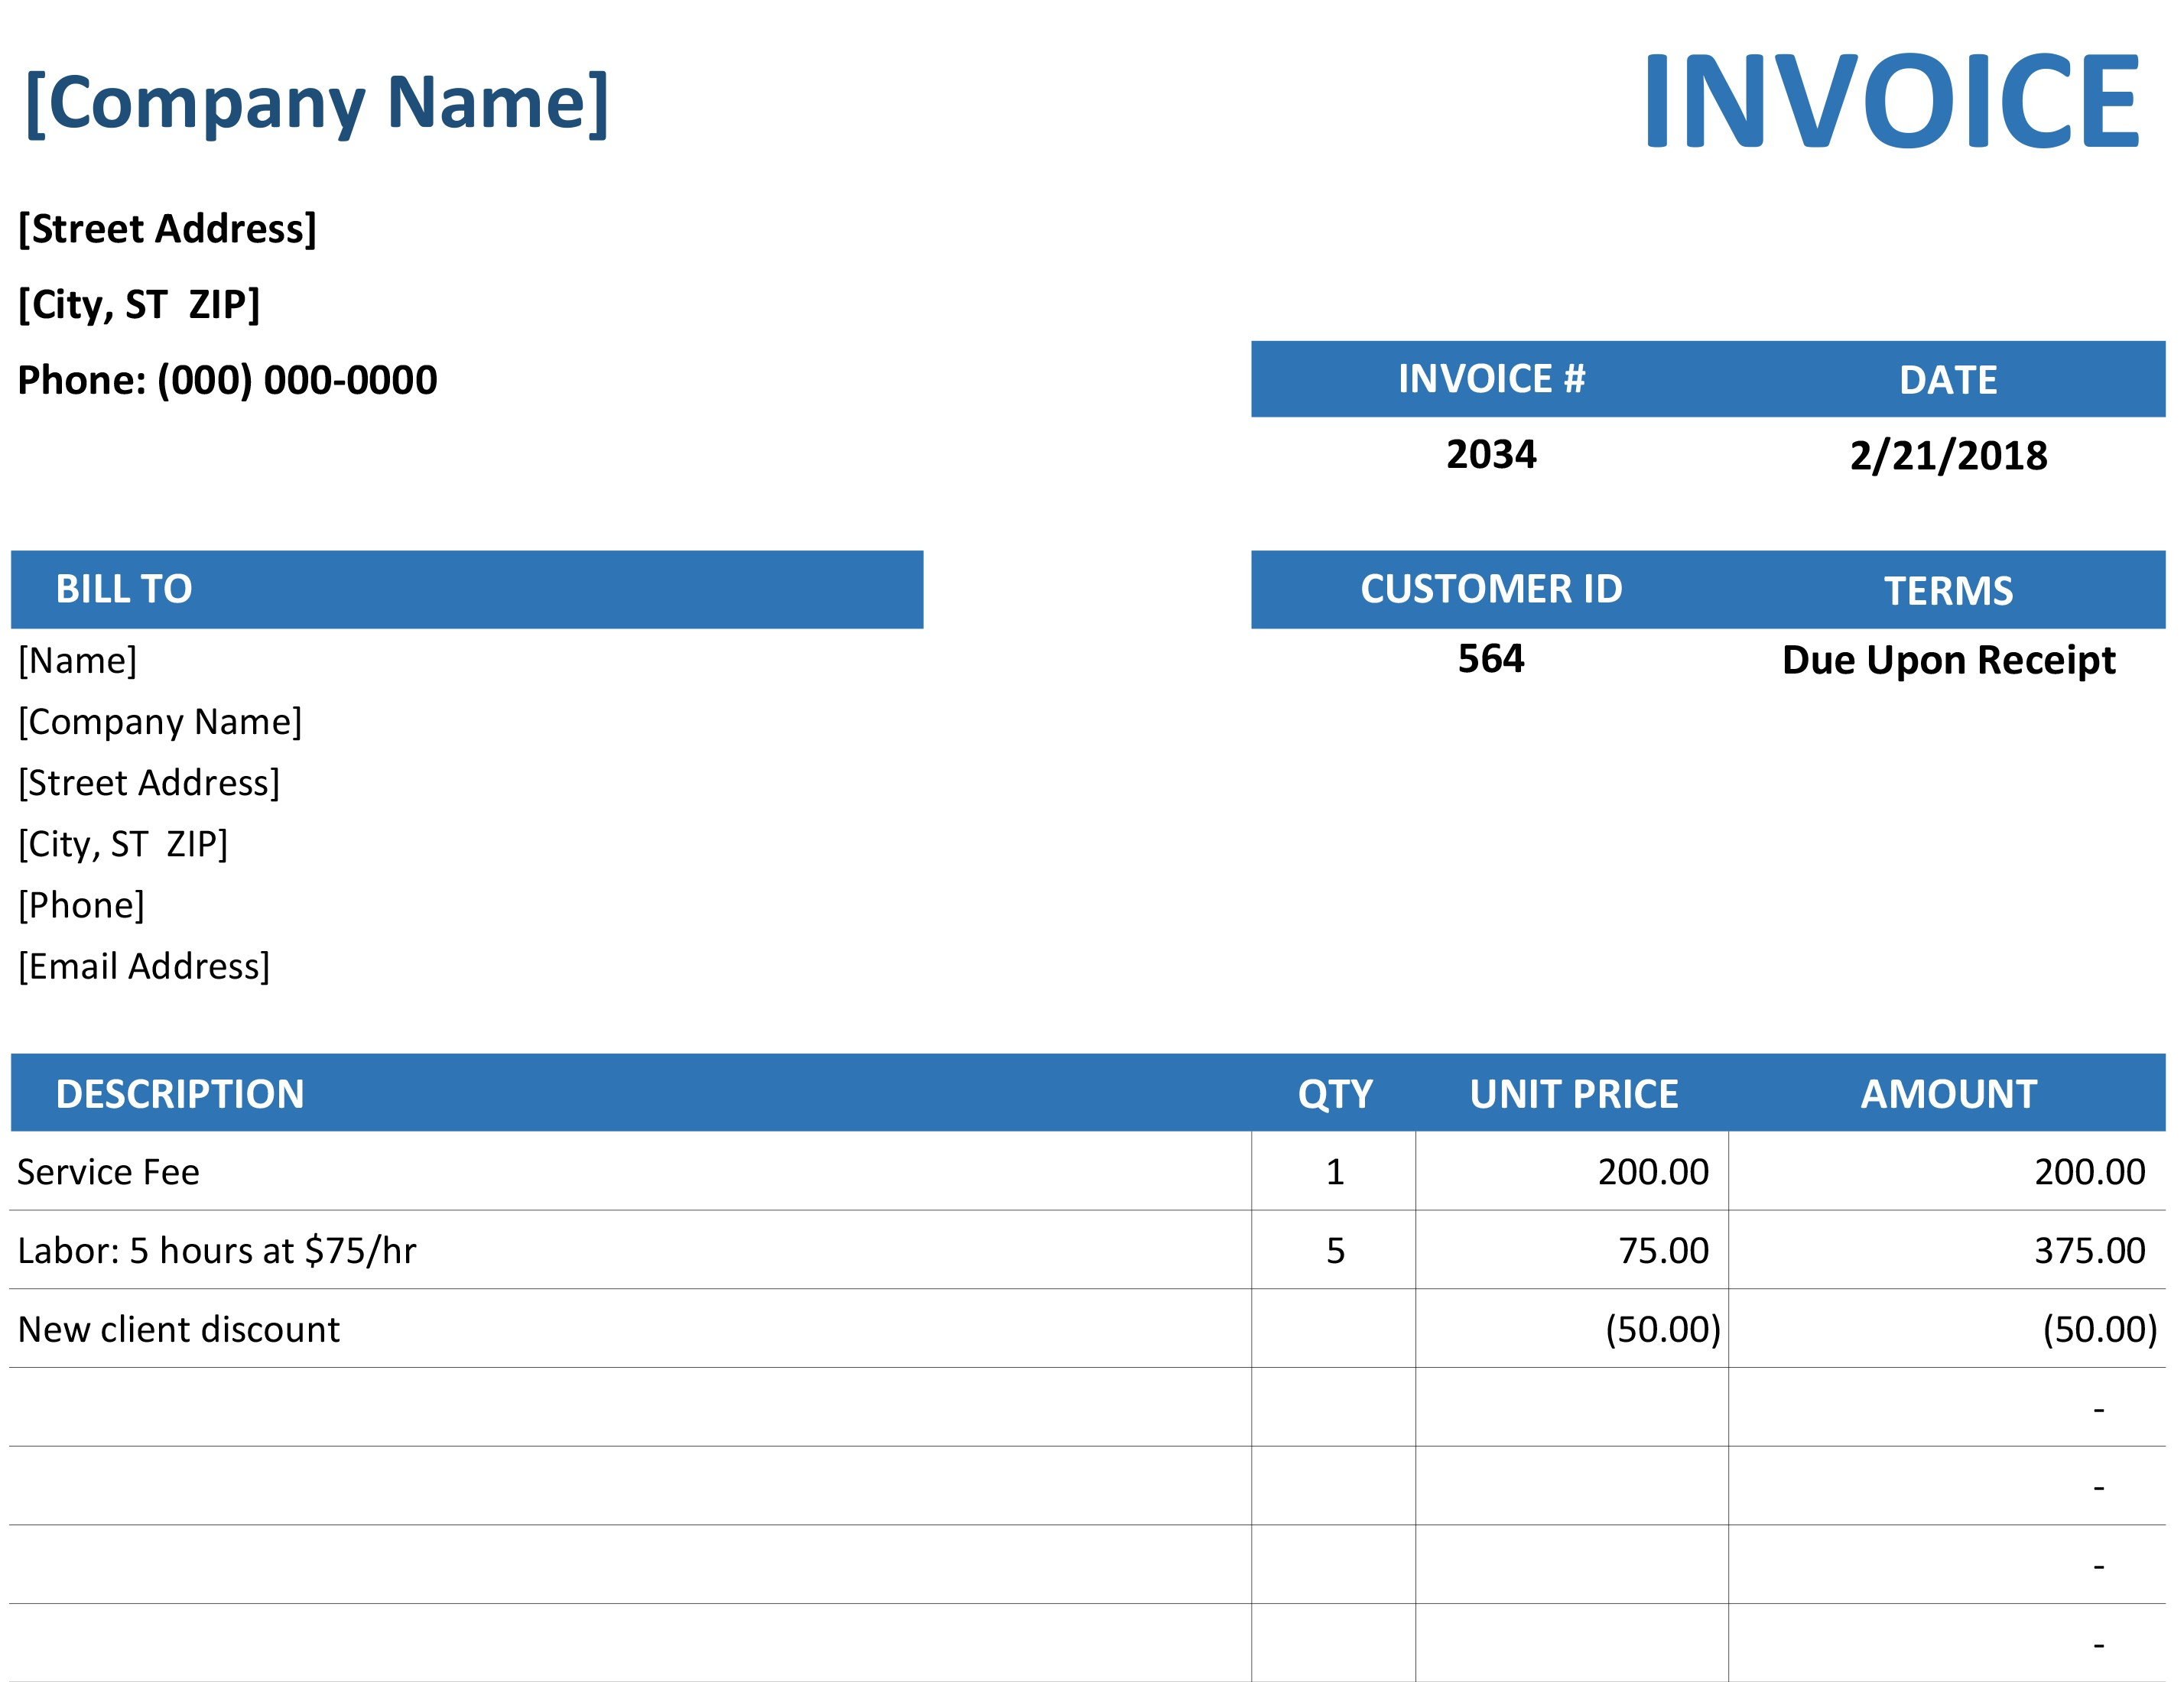 Invoices Office With Microsoft Invoice Office Templates — Db